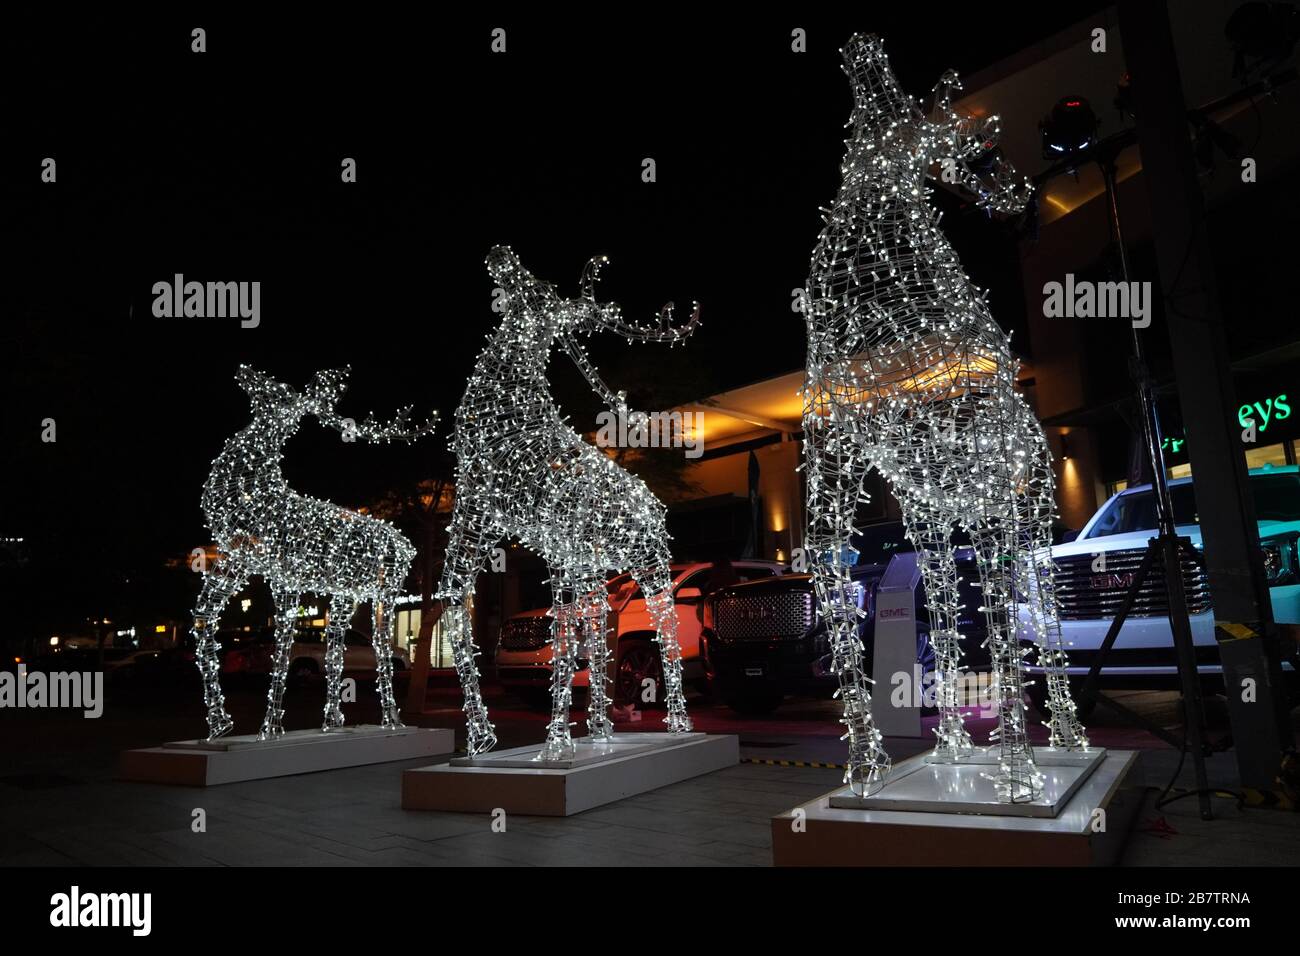 Glowing reindeer made of wire and light bulbs. Christmas decorations. Christmas  Lights on reindeer shape wire frame mesh. Deer Christmas outdoor decor  Stock Photo - Alamy